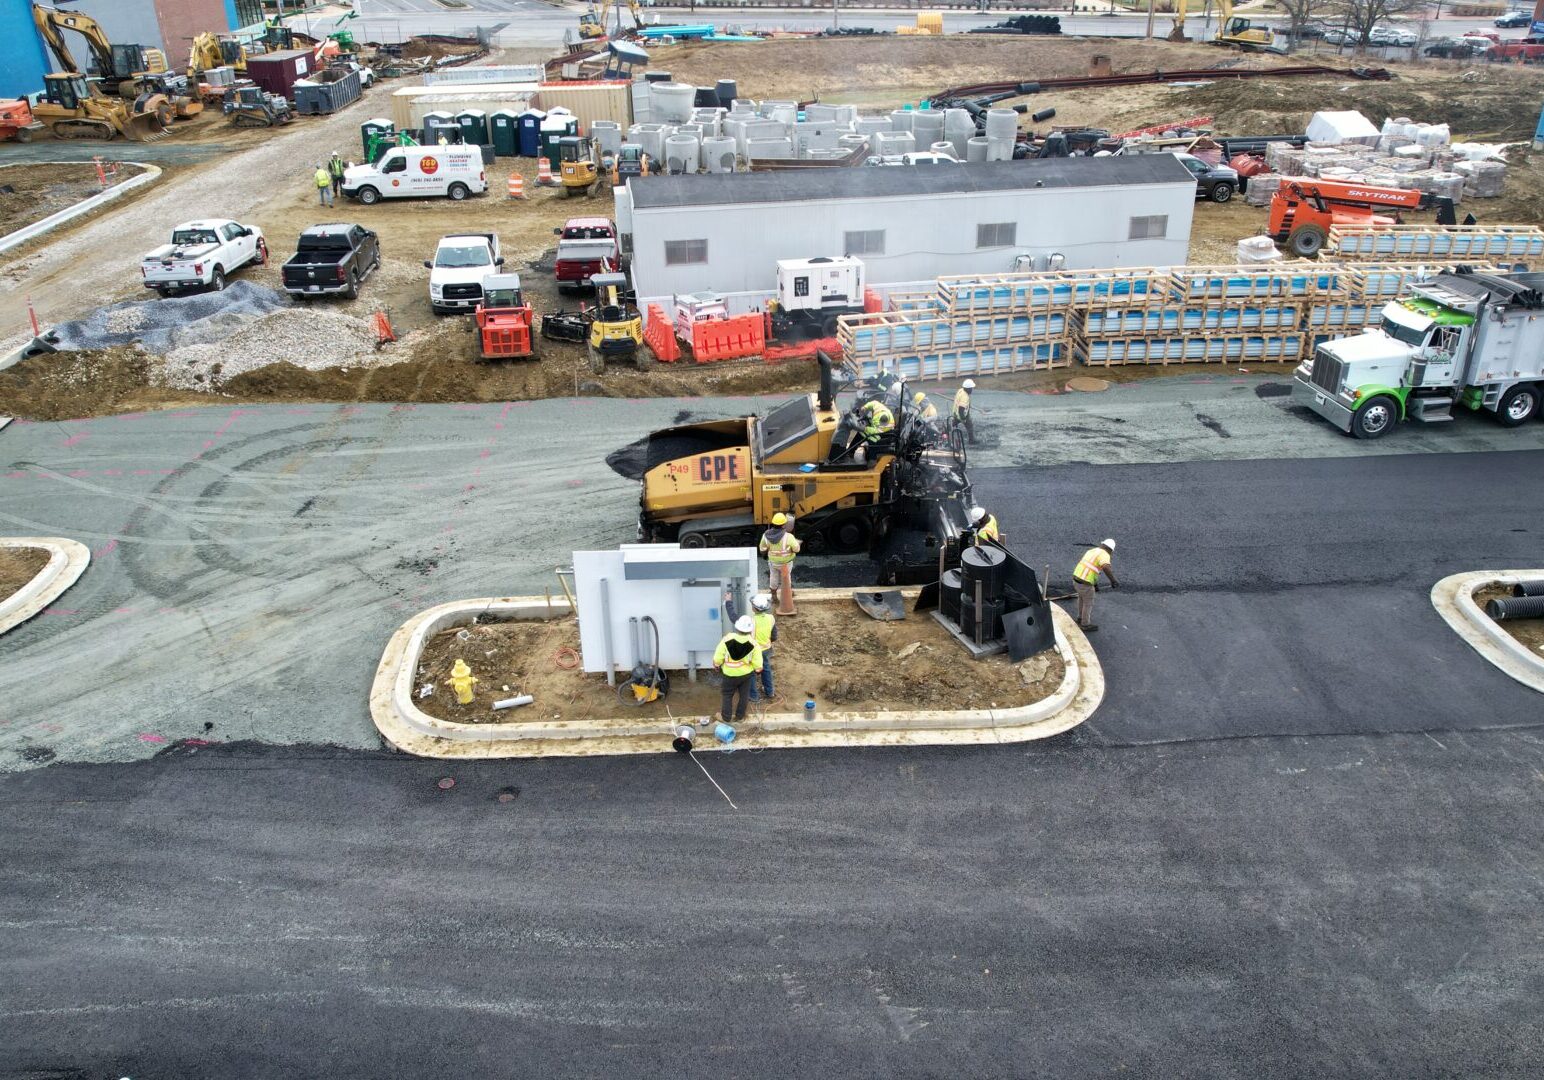 A construction site with workers and equipment on the ground.